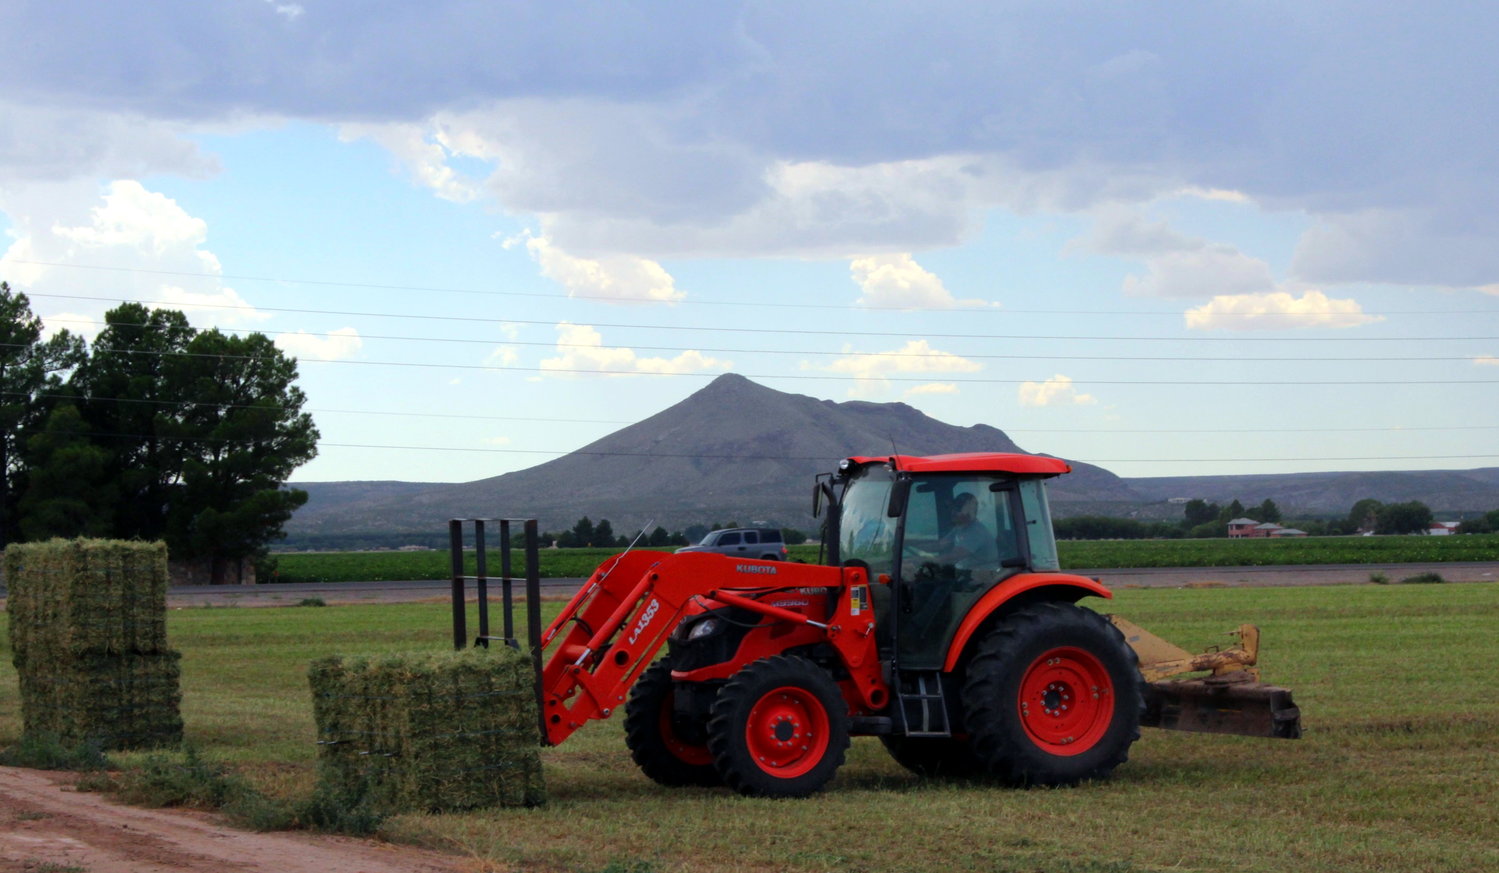 The New Mexico Hay and Livestock Co. harvest alfalfa in the Mesilla Valley.